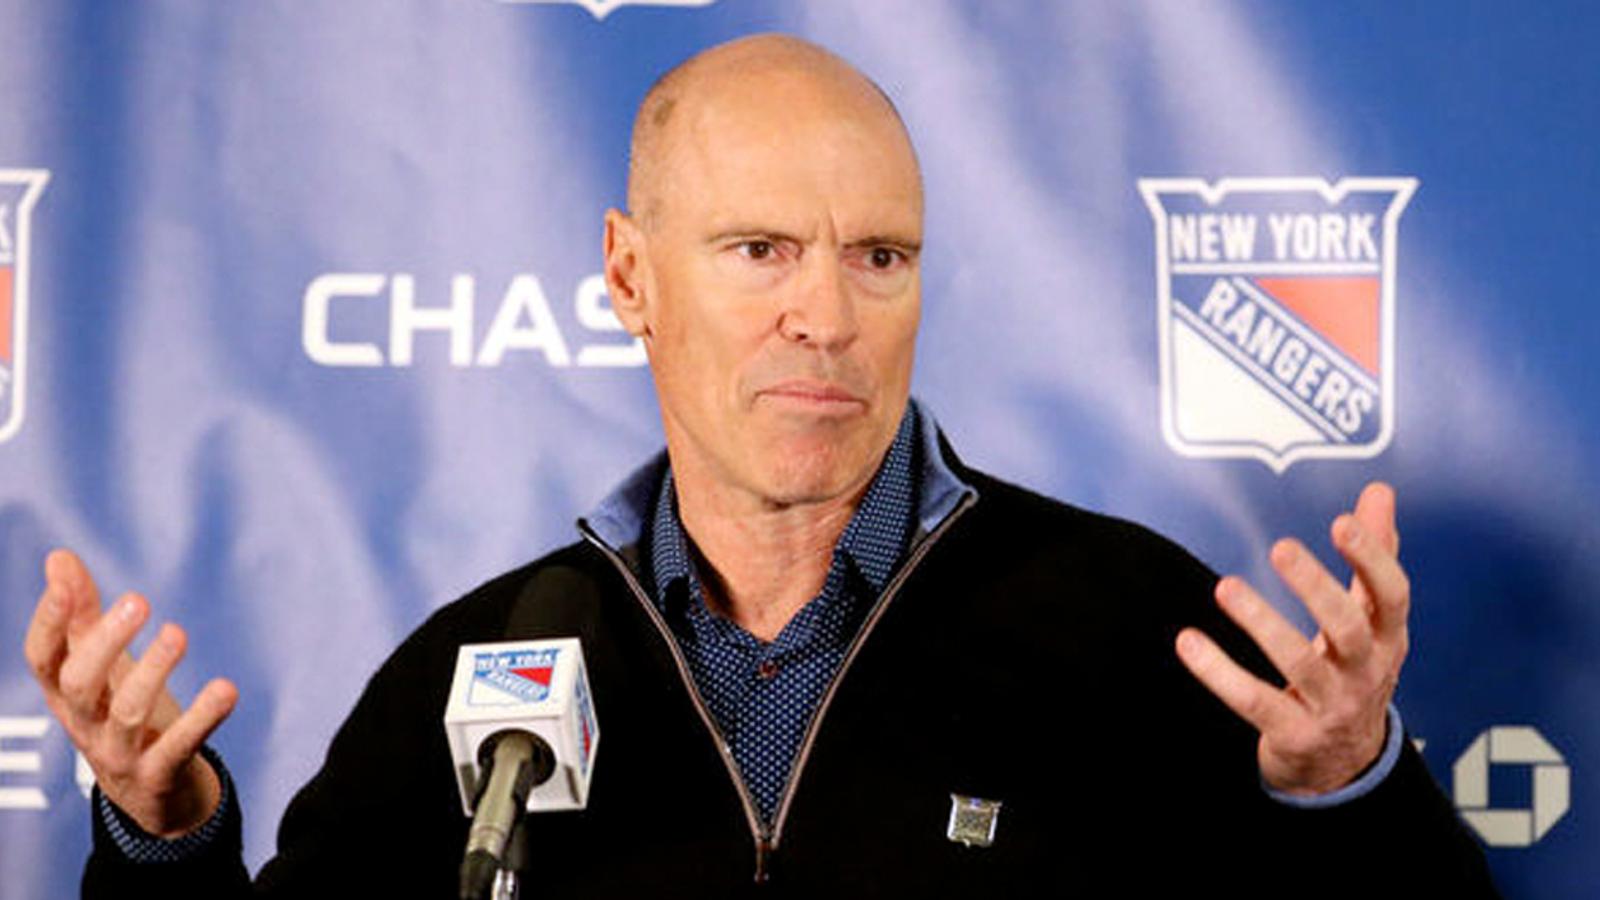 A clearly jilted Mark Messier criticizes Rangers for front office moves